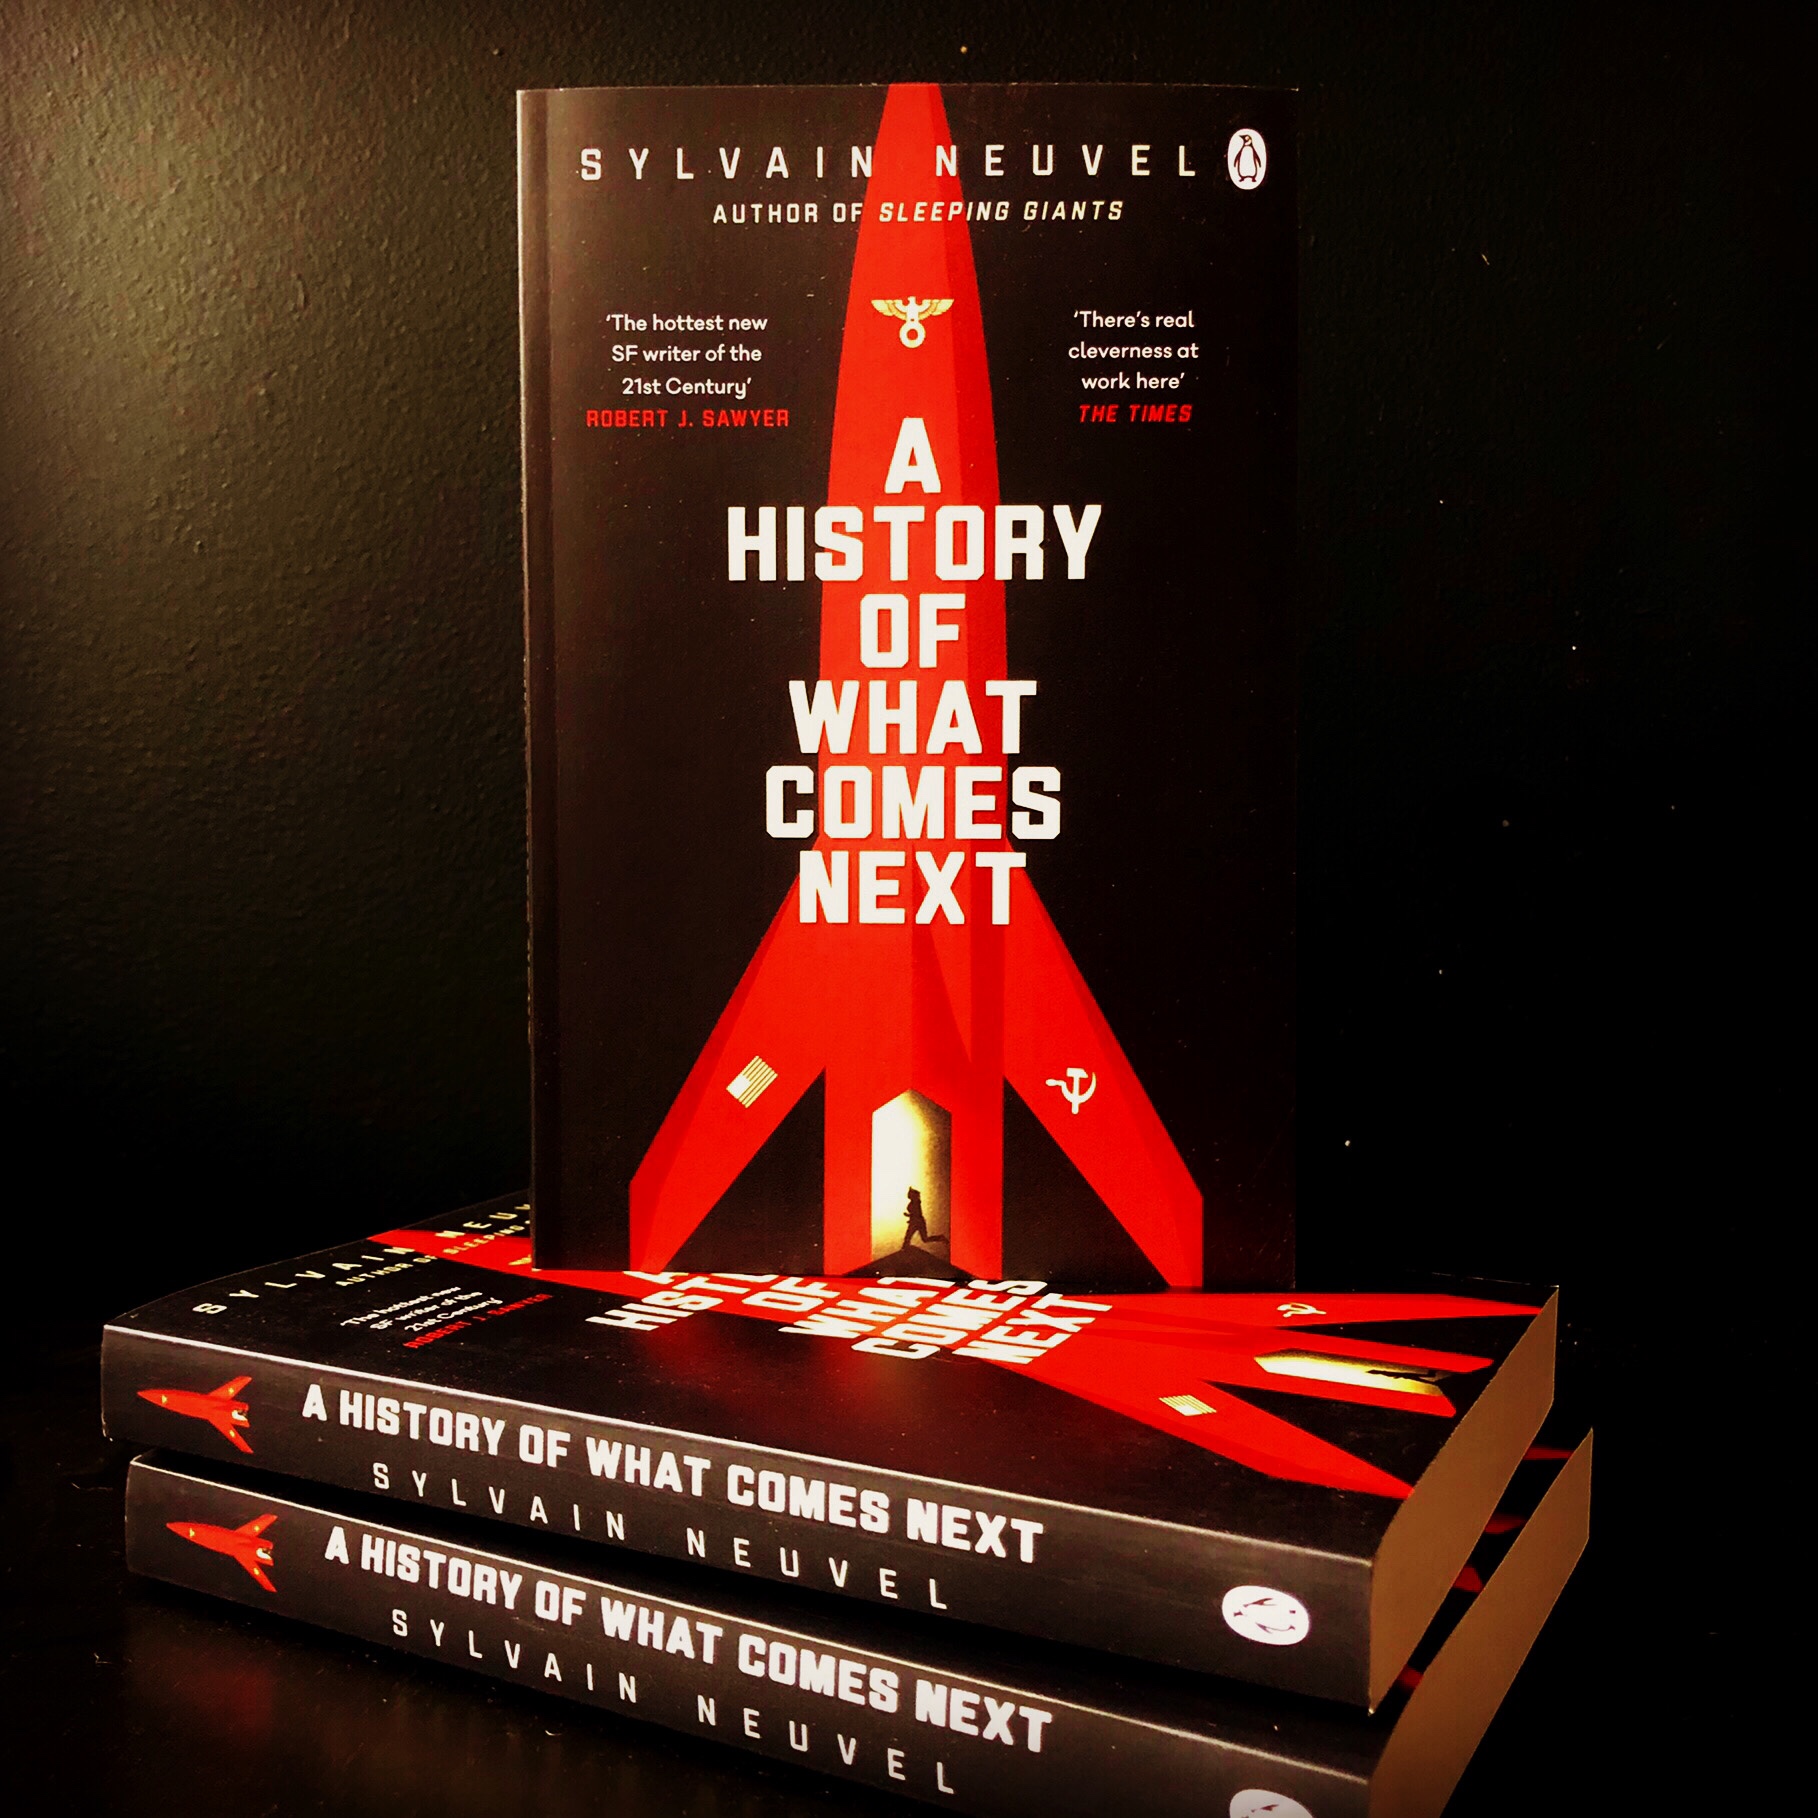 UK friends, the paperback of A History of What Comes Next is available now